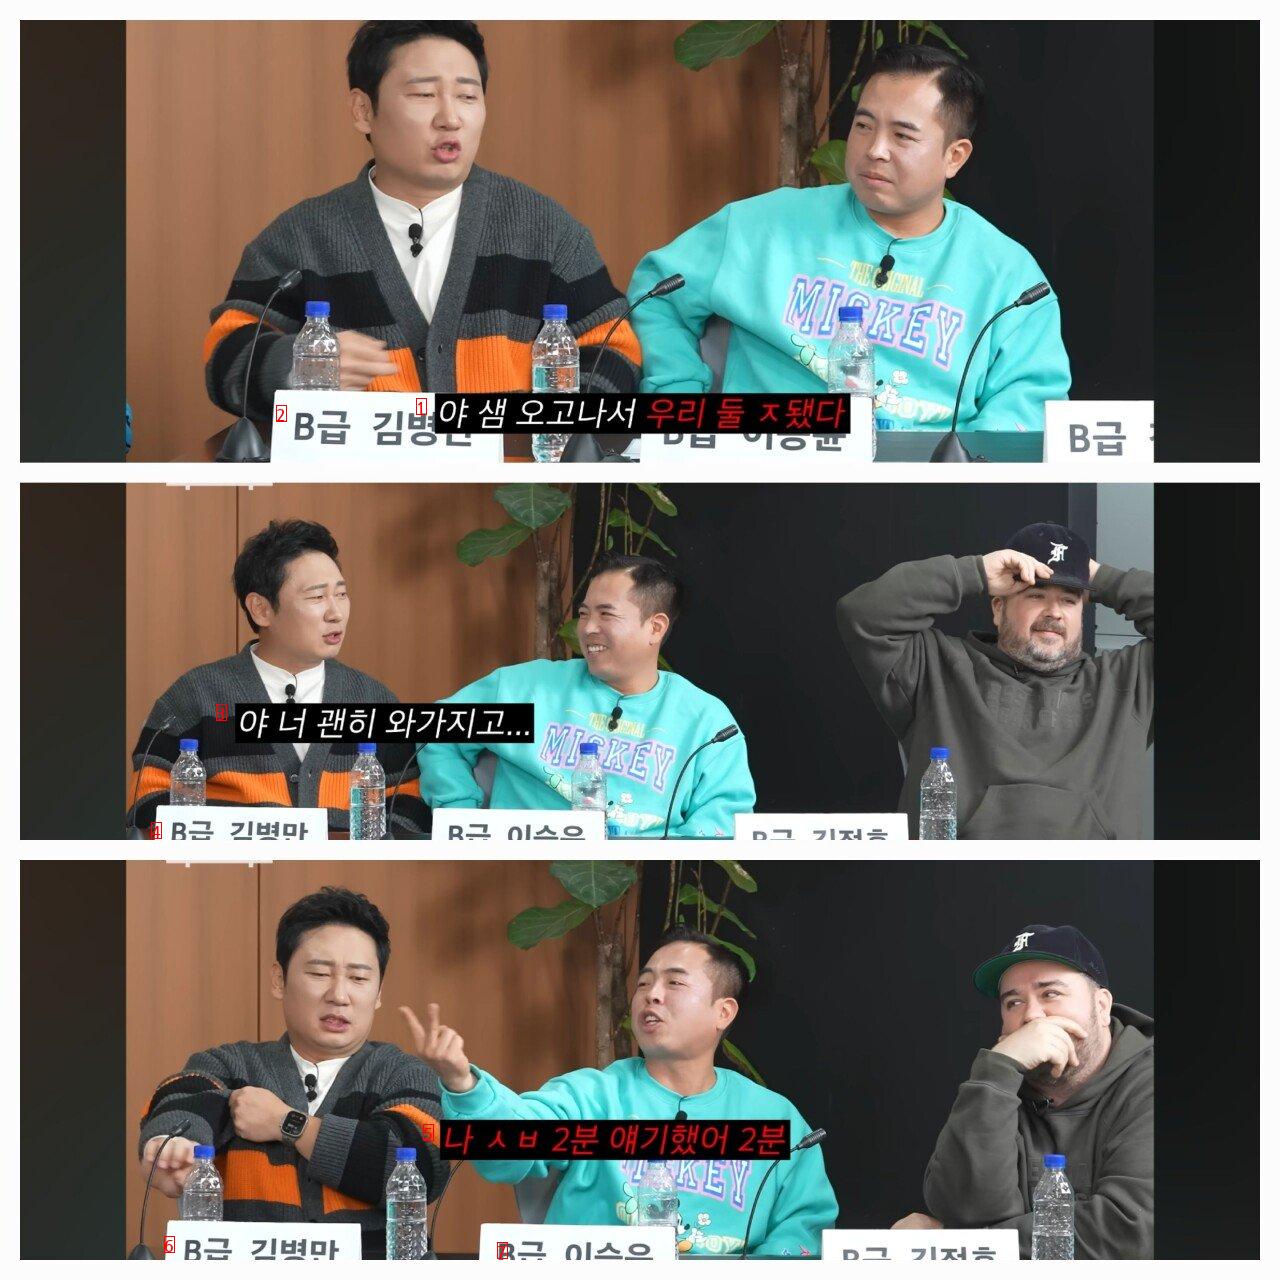 Kim Byungman's poop explanation episode. Jokes from another world LOL